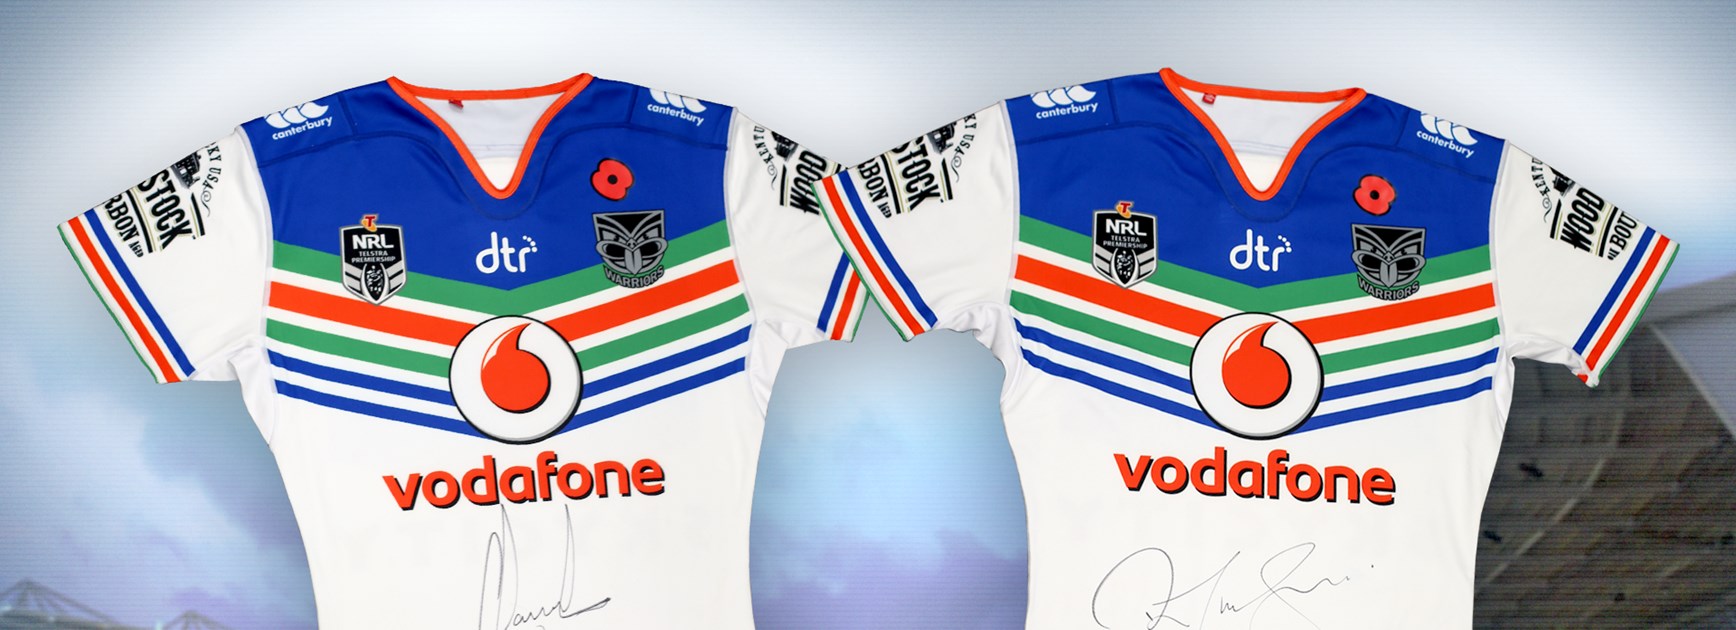 New Zealand Vodafone Warriors signed replica shirt. Competition on  1895sports